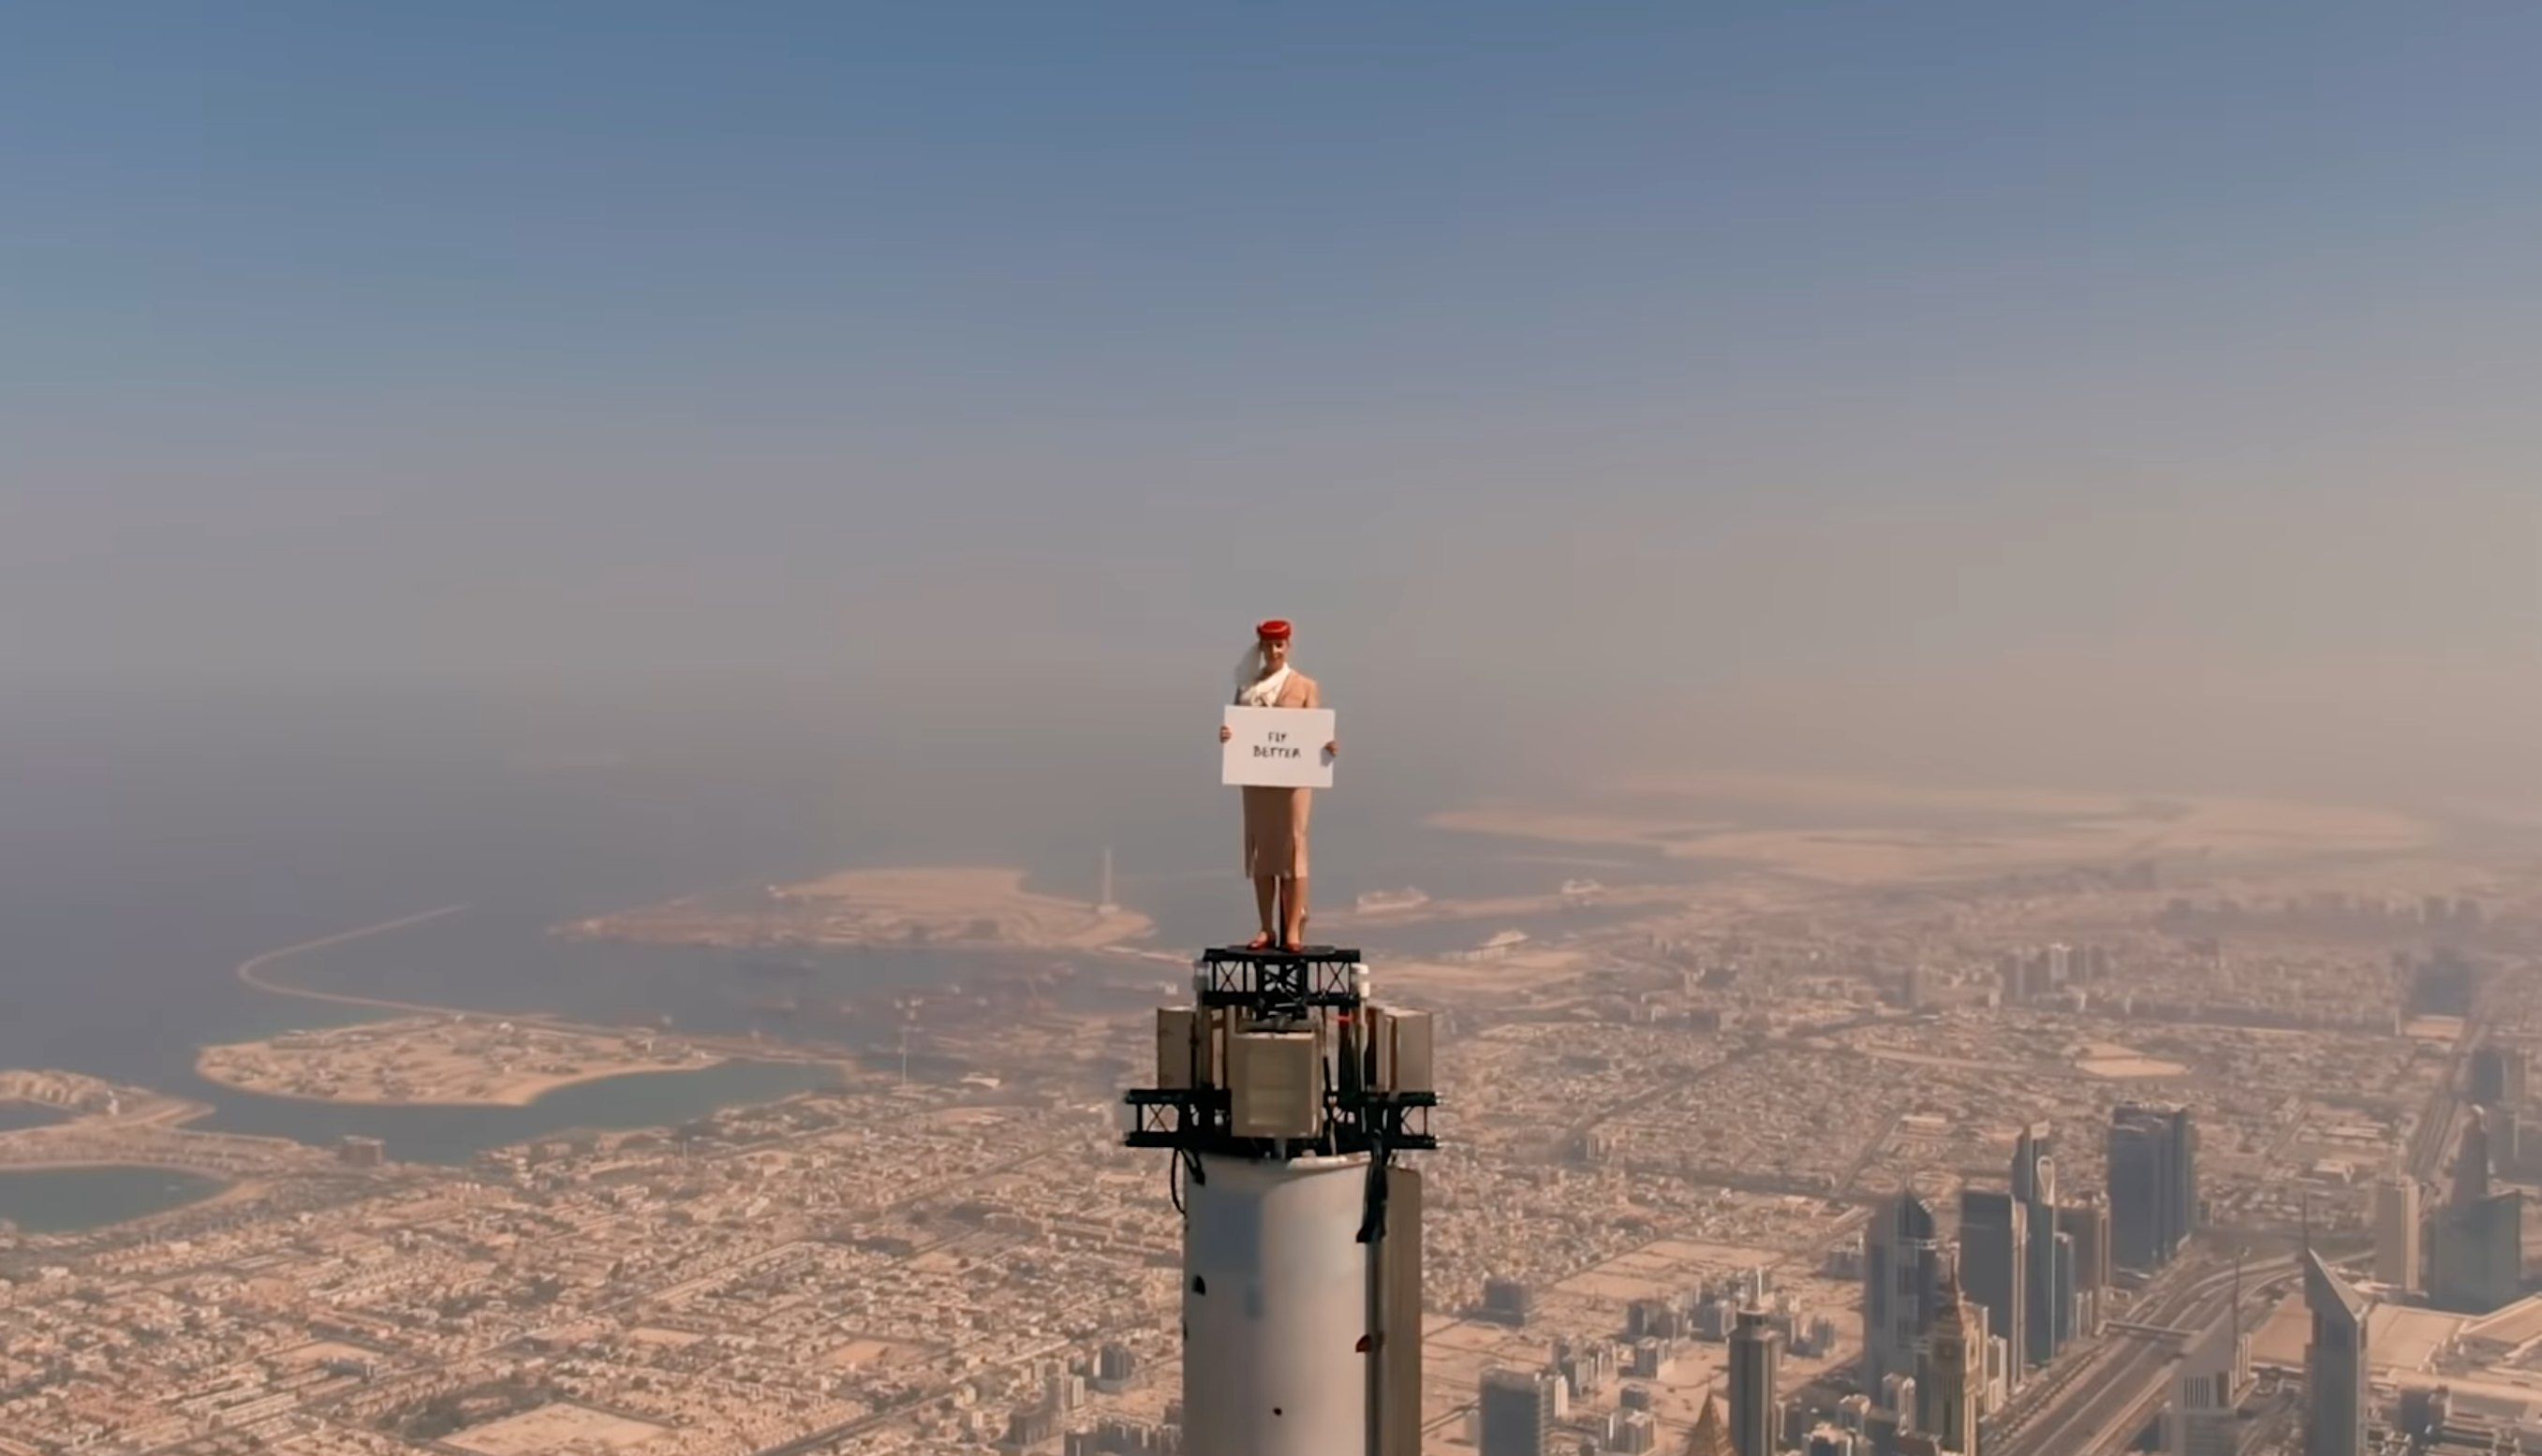 Emirates Really Put a Flight Attendant On Top of the World's Tallest Building in Crazy Marketing Stunt